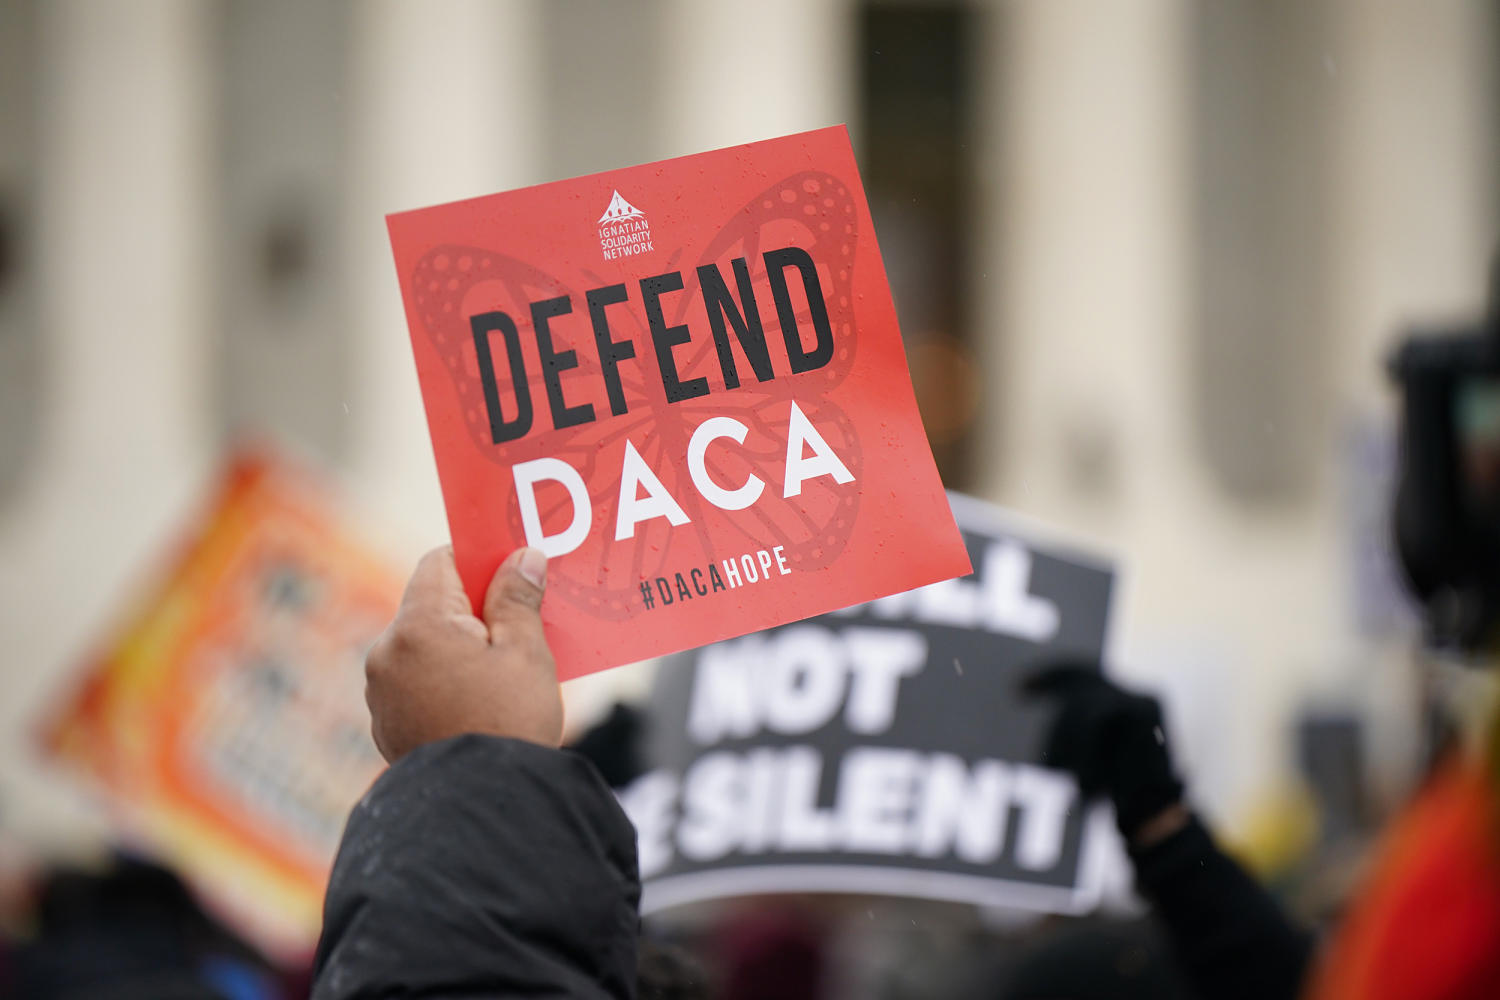 Dreamers urge for protections in Senate hearing on immigrant youth